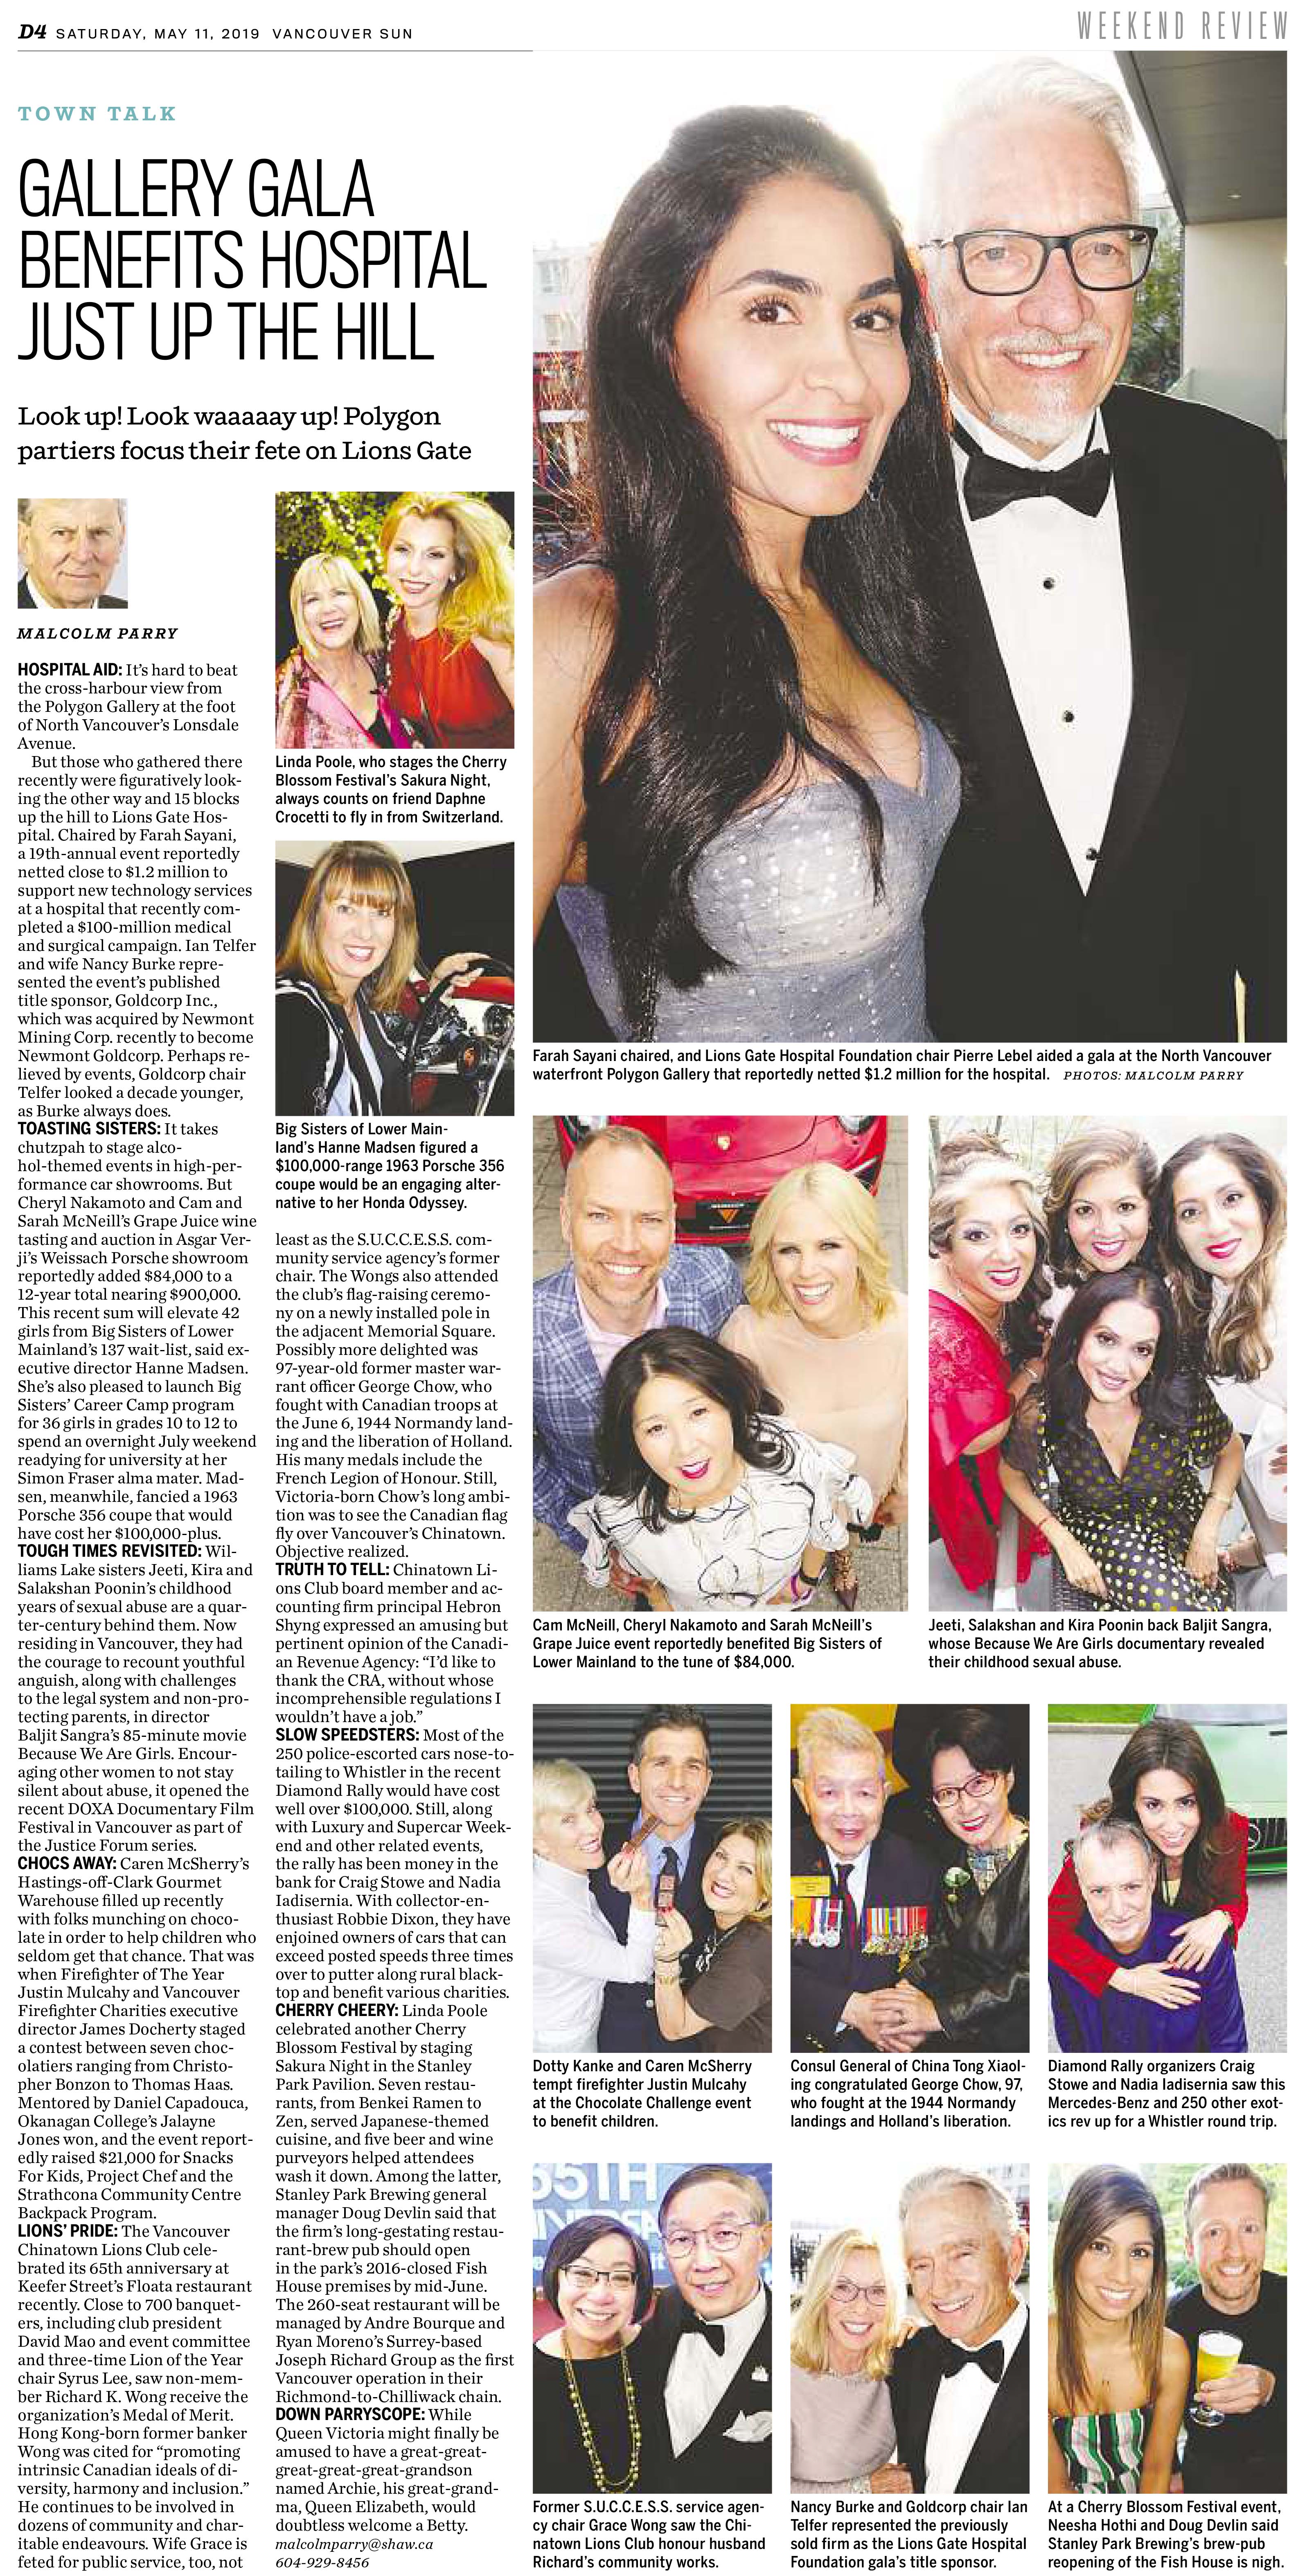 May 11 - Vancouver Sun